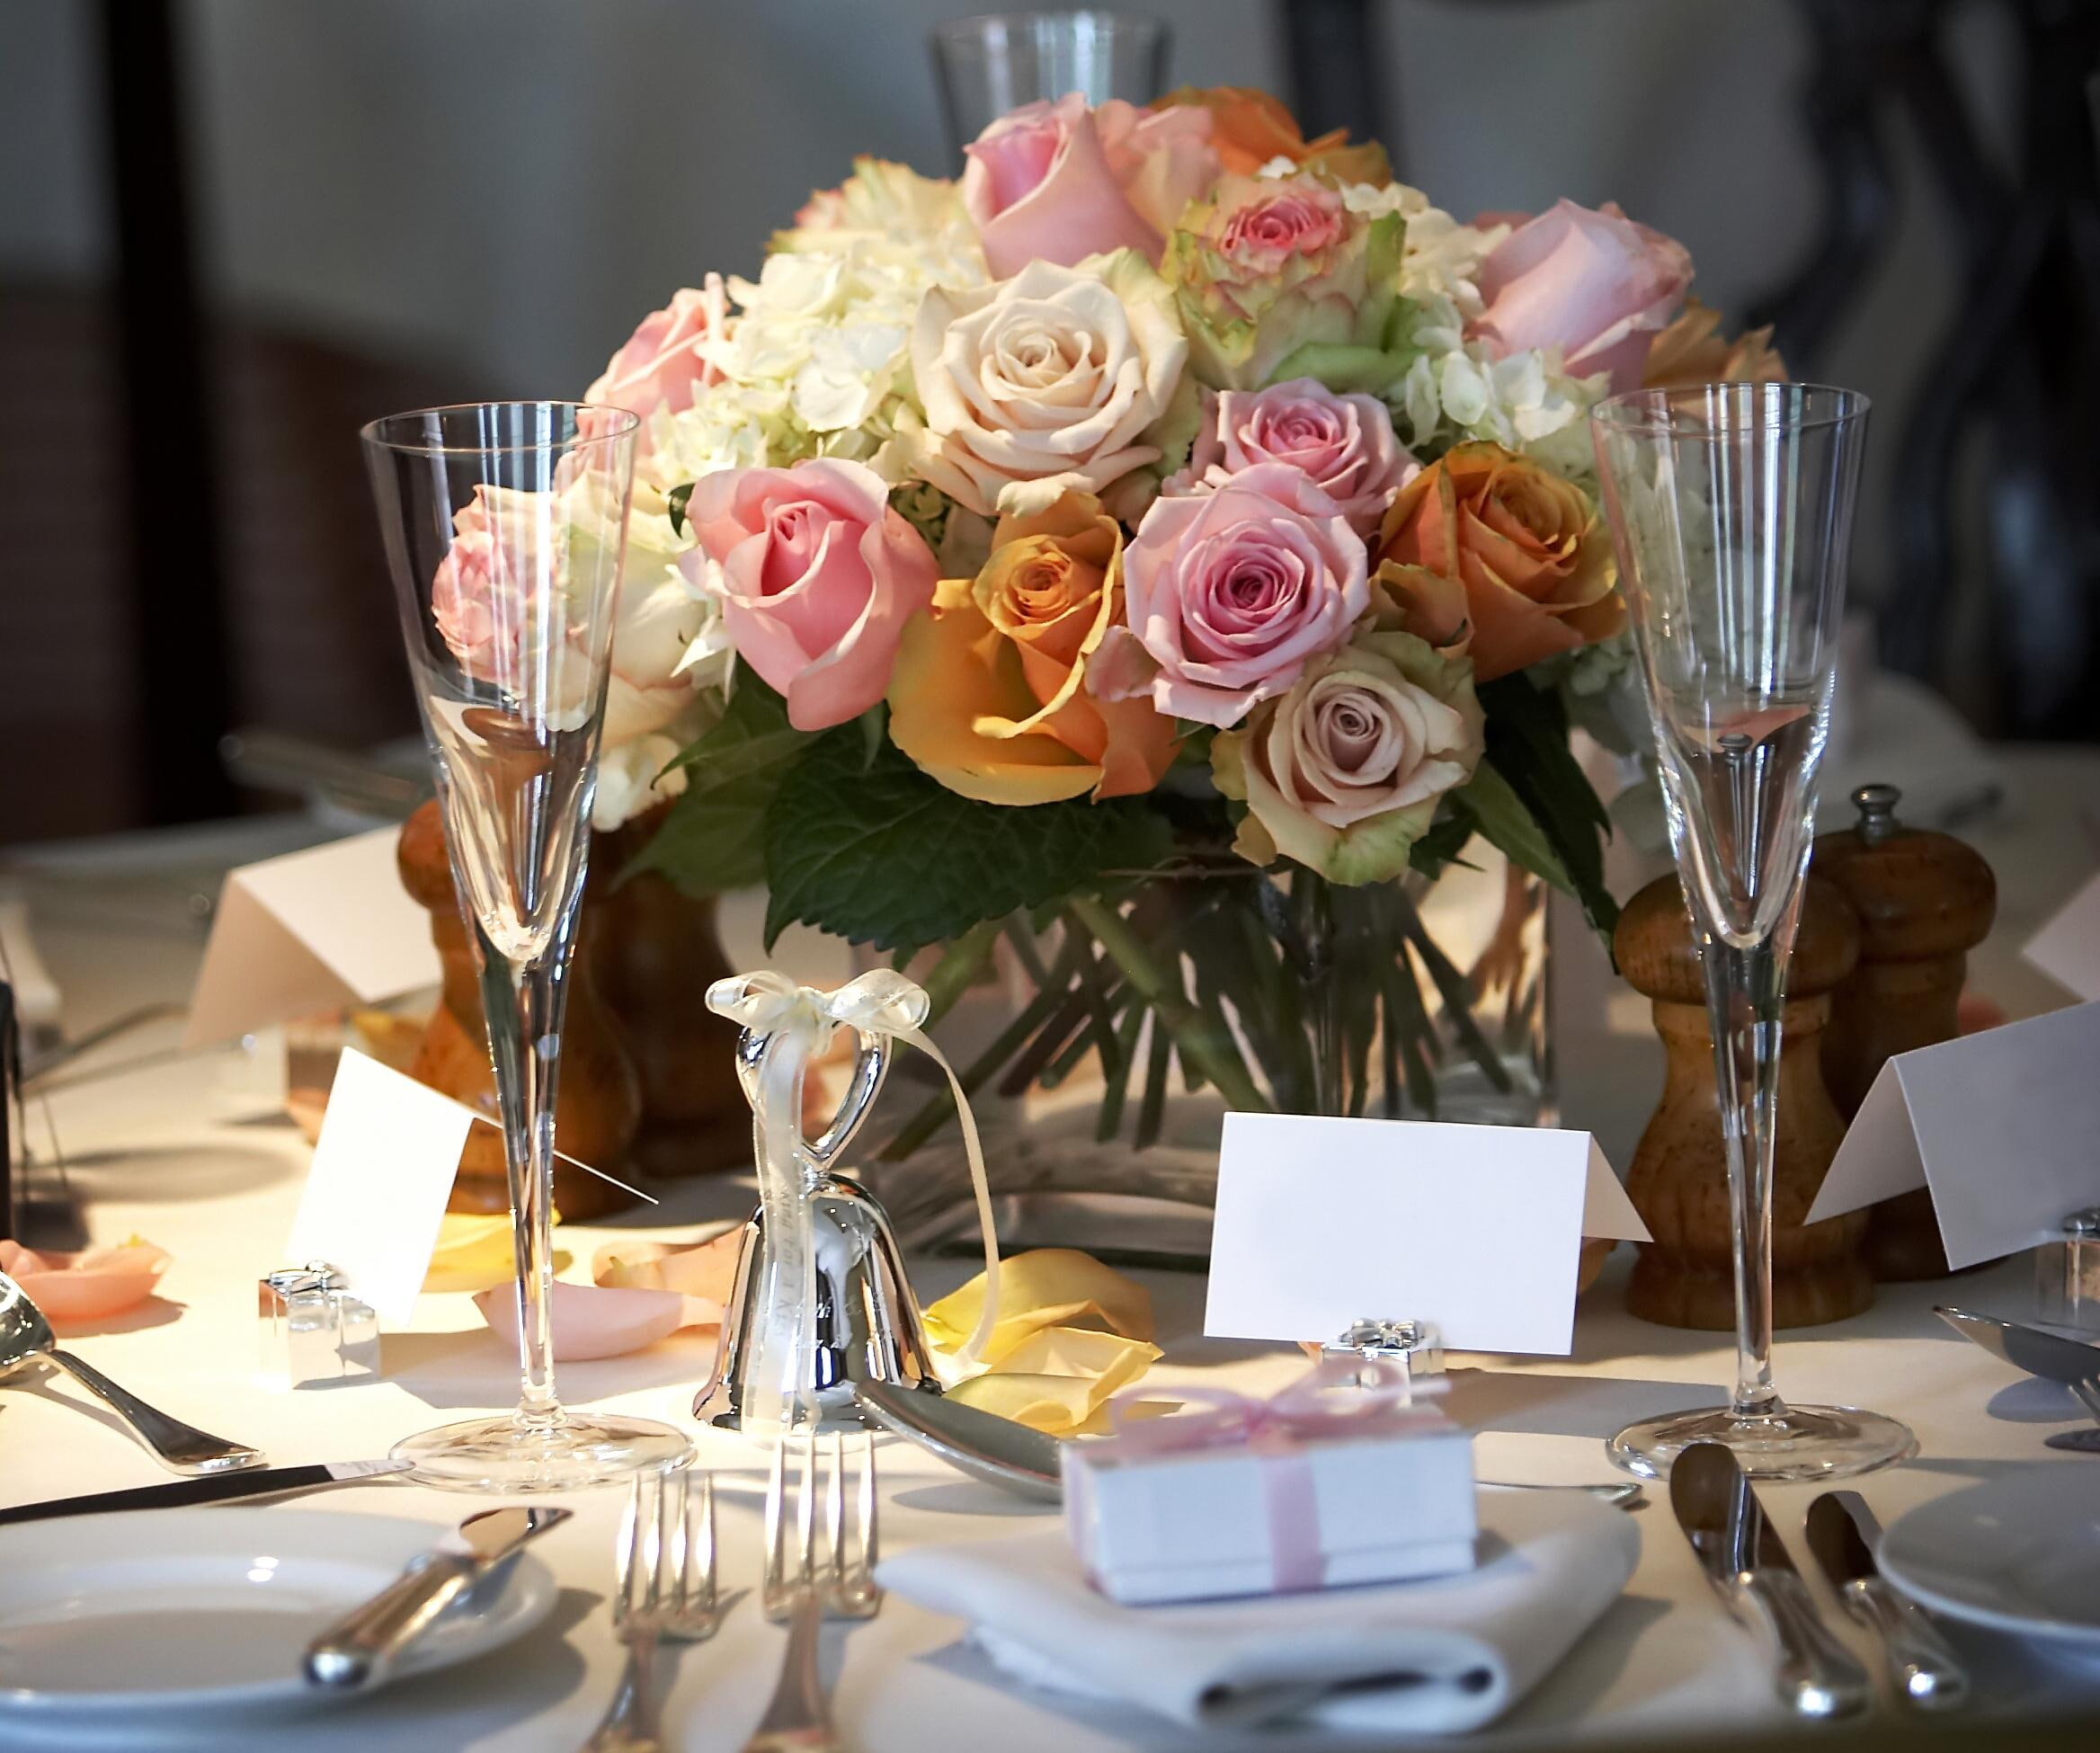 Wedding Table, lovely, romantic, pink roses, white, beautiful